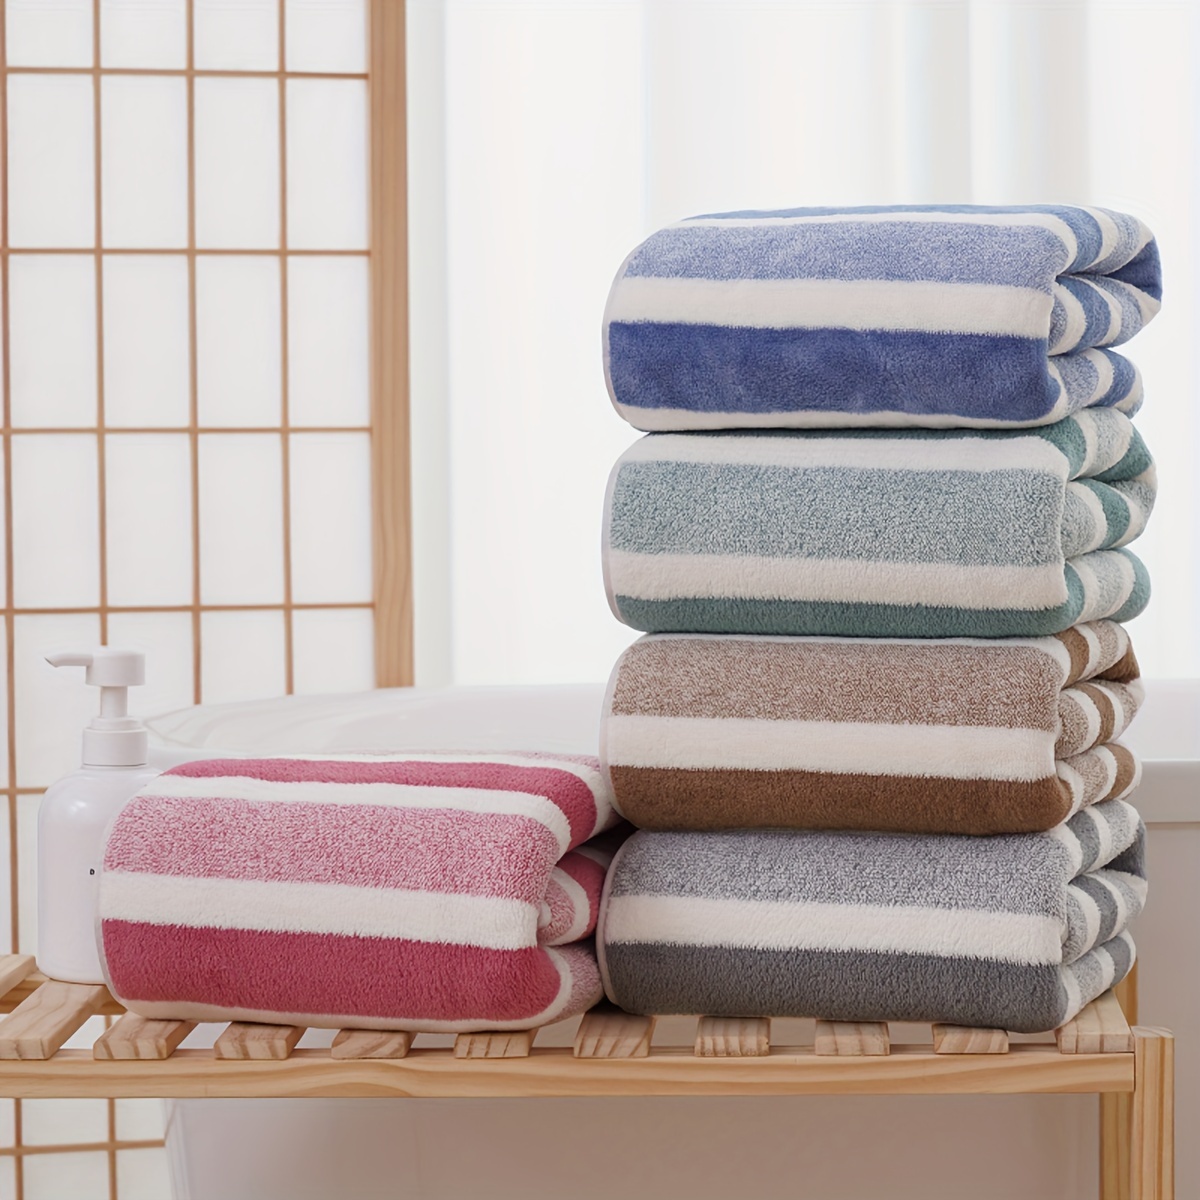 

Ultra-soft Striped Bath Towel 55.1x27.5in - Highly Absorbent, Lint-free For Shower, Travel & Sports